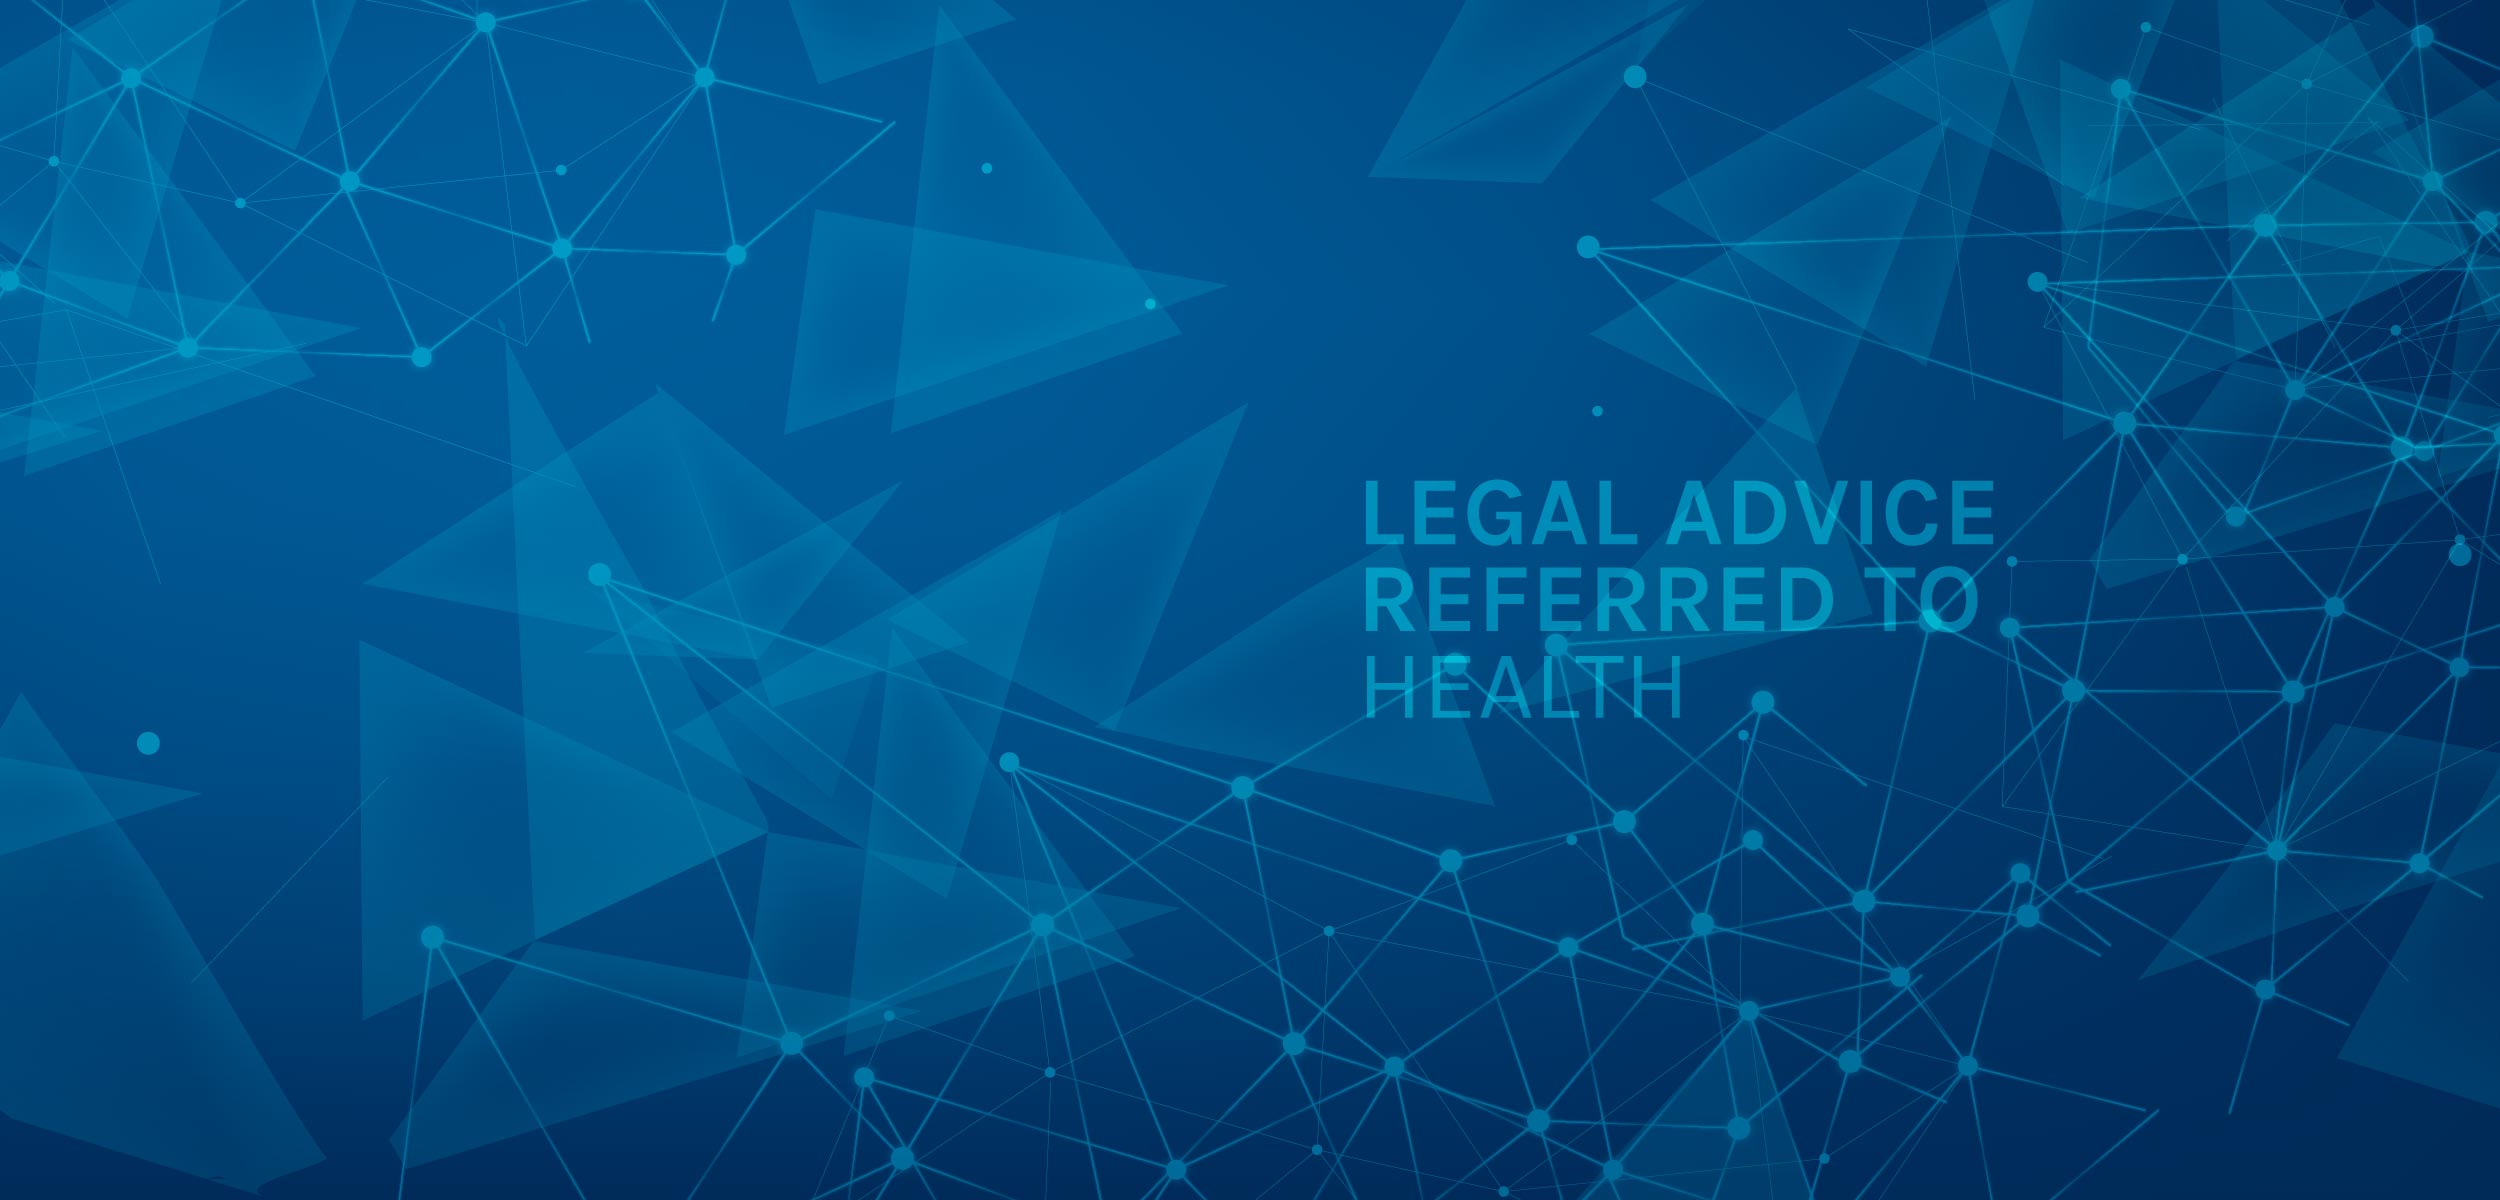 Cover Legal Advice Referred to Health